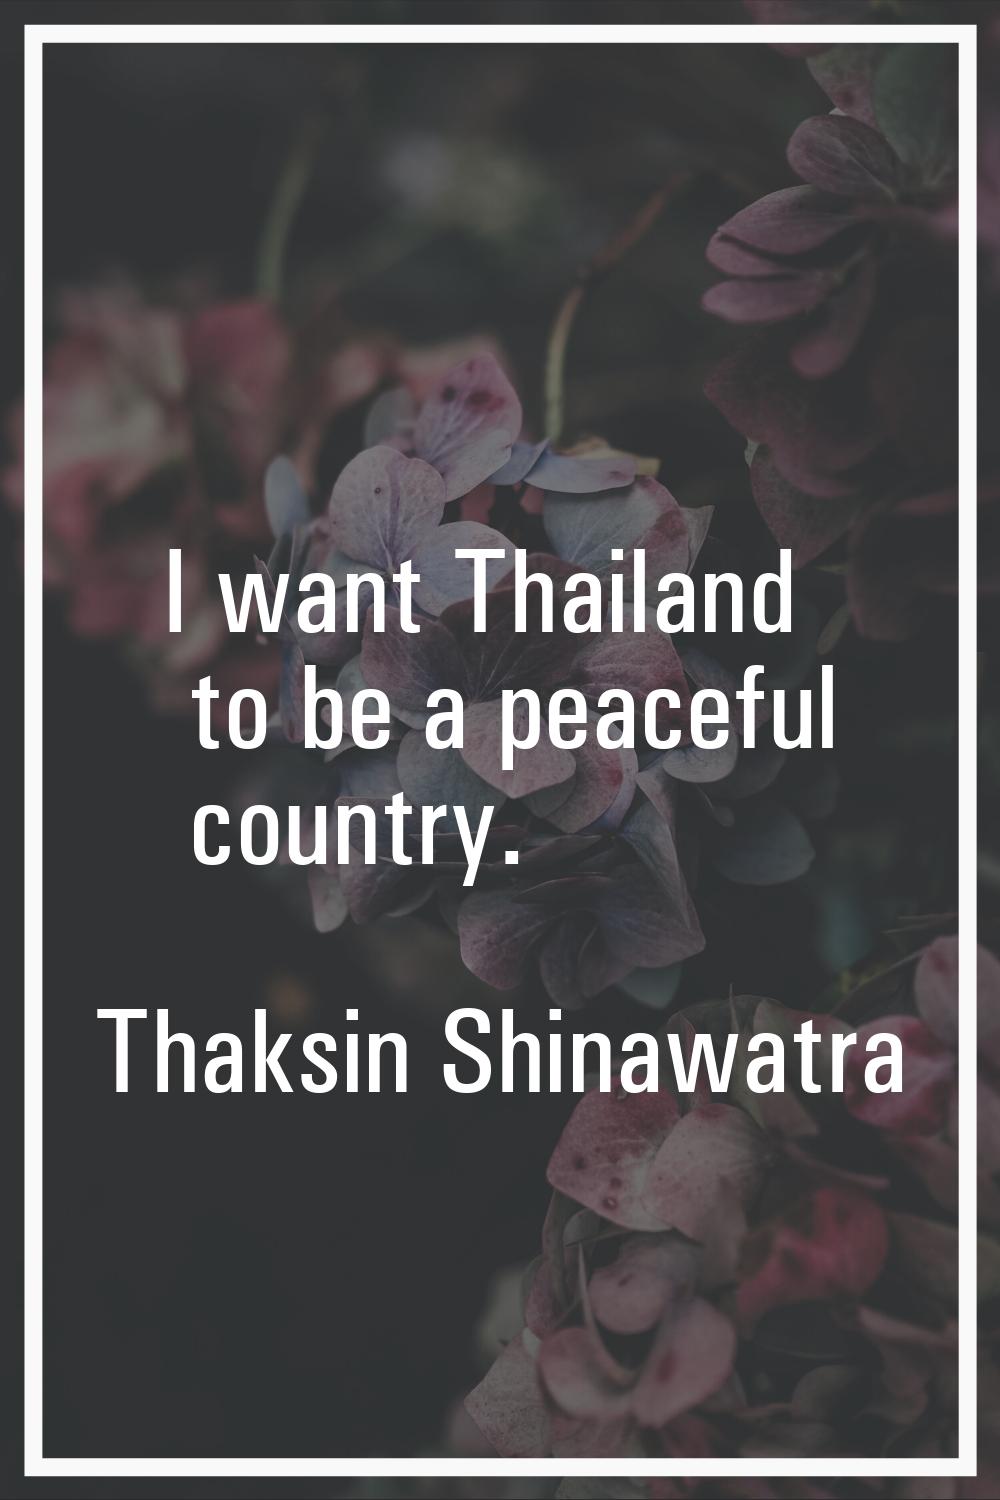 I want Thailand to be a peaceful country.